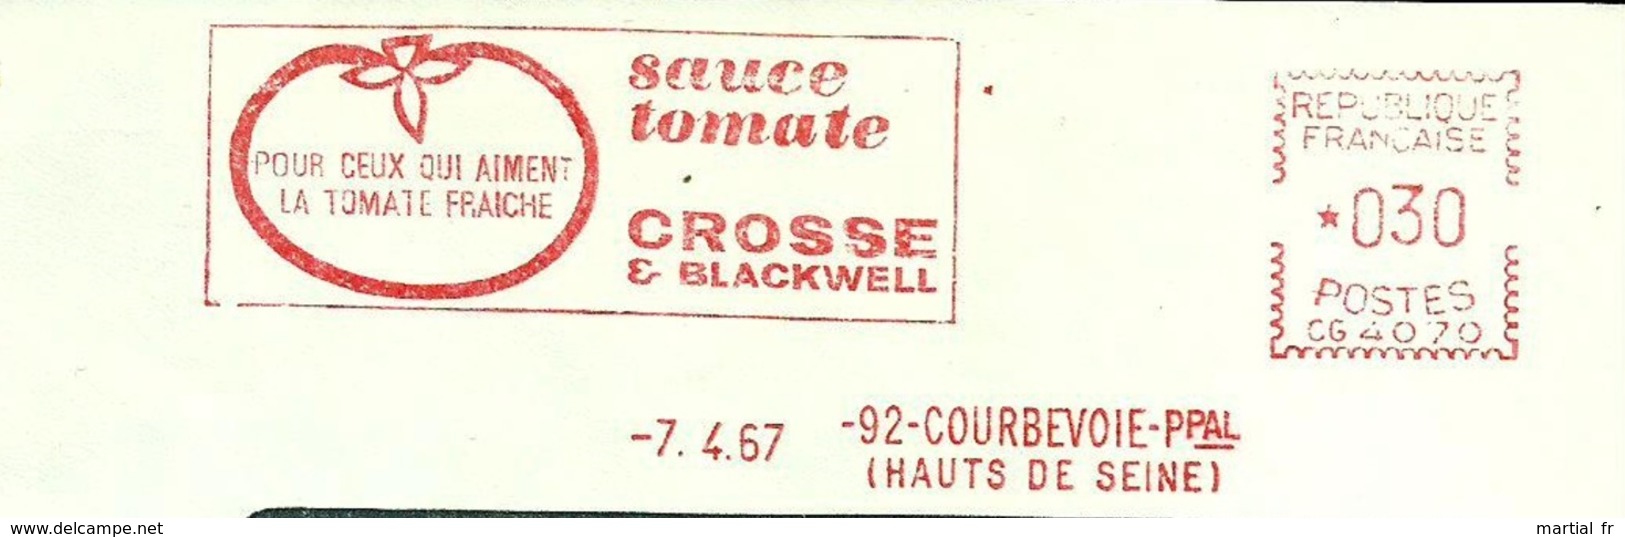 FRANCE SAUCE TOMATE CROSSE COURBEVOIE ALIMENTATION TOMATO Aliment Alimentation TOMATENSAUS SALSA DI POMODORO MOLHO - Ernährung